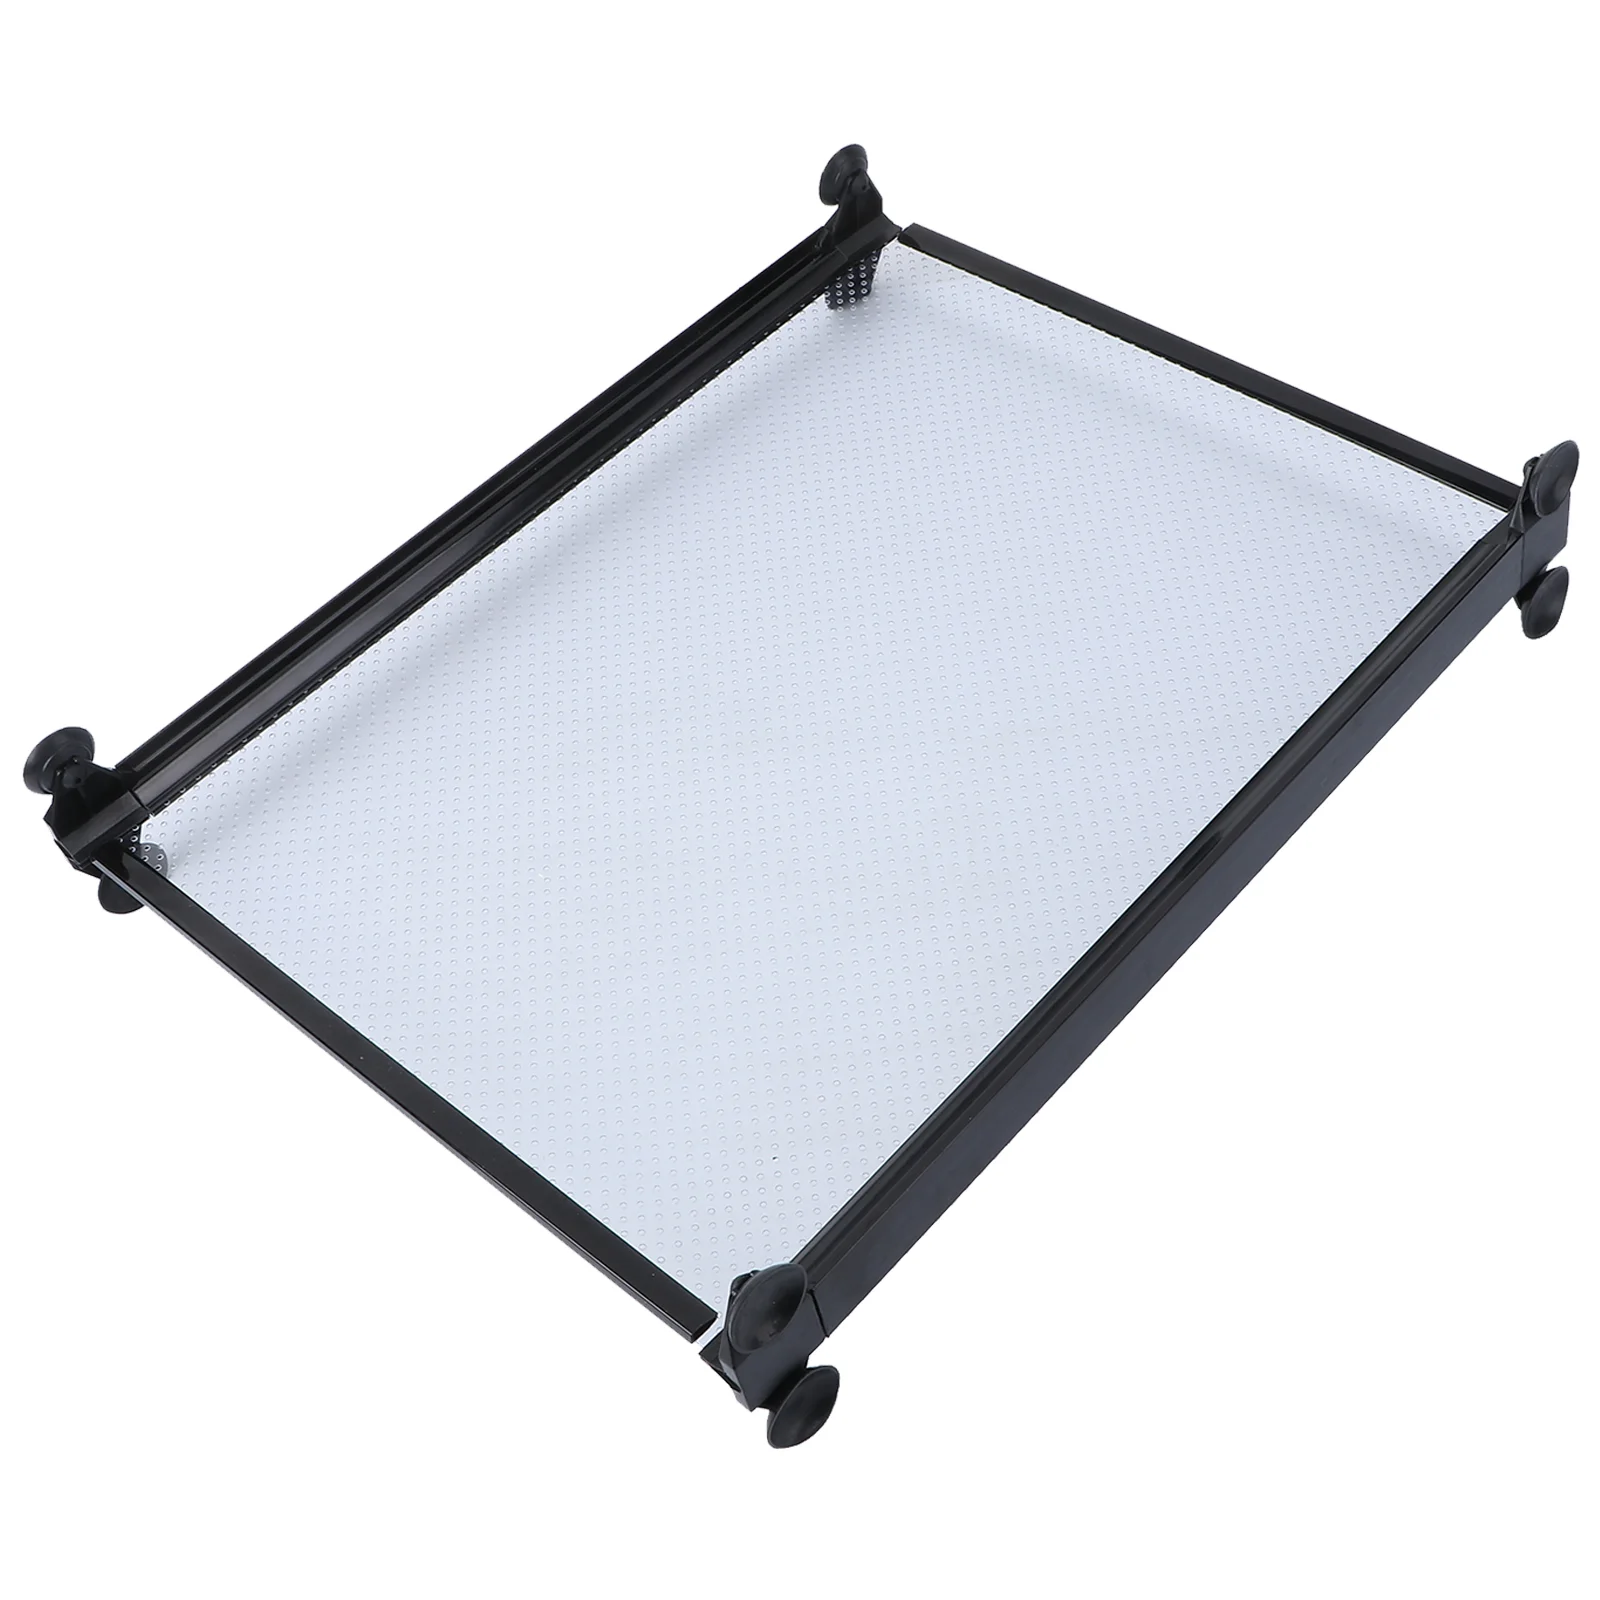 

tank divider with suction cup aquarium divider isolation board grid divider mixed breeding tank bottom External filter for